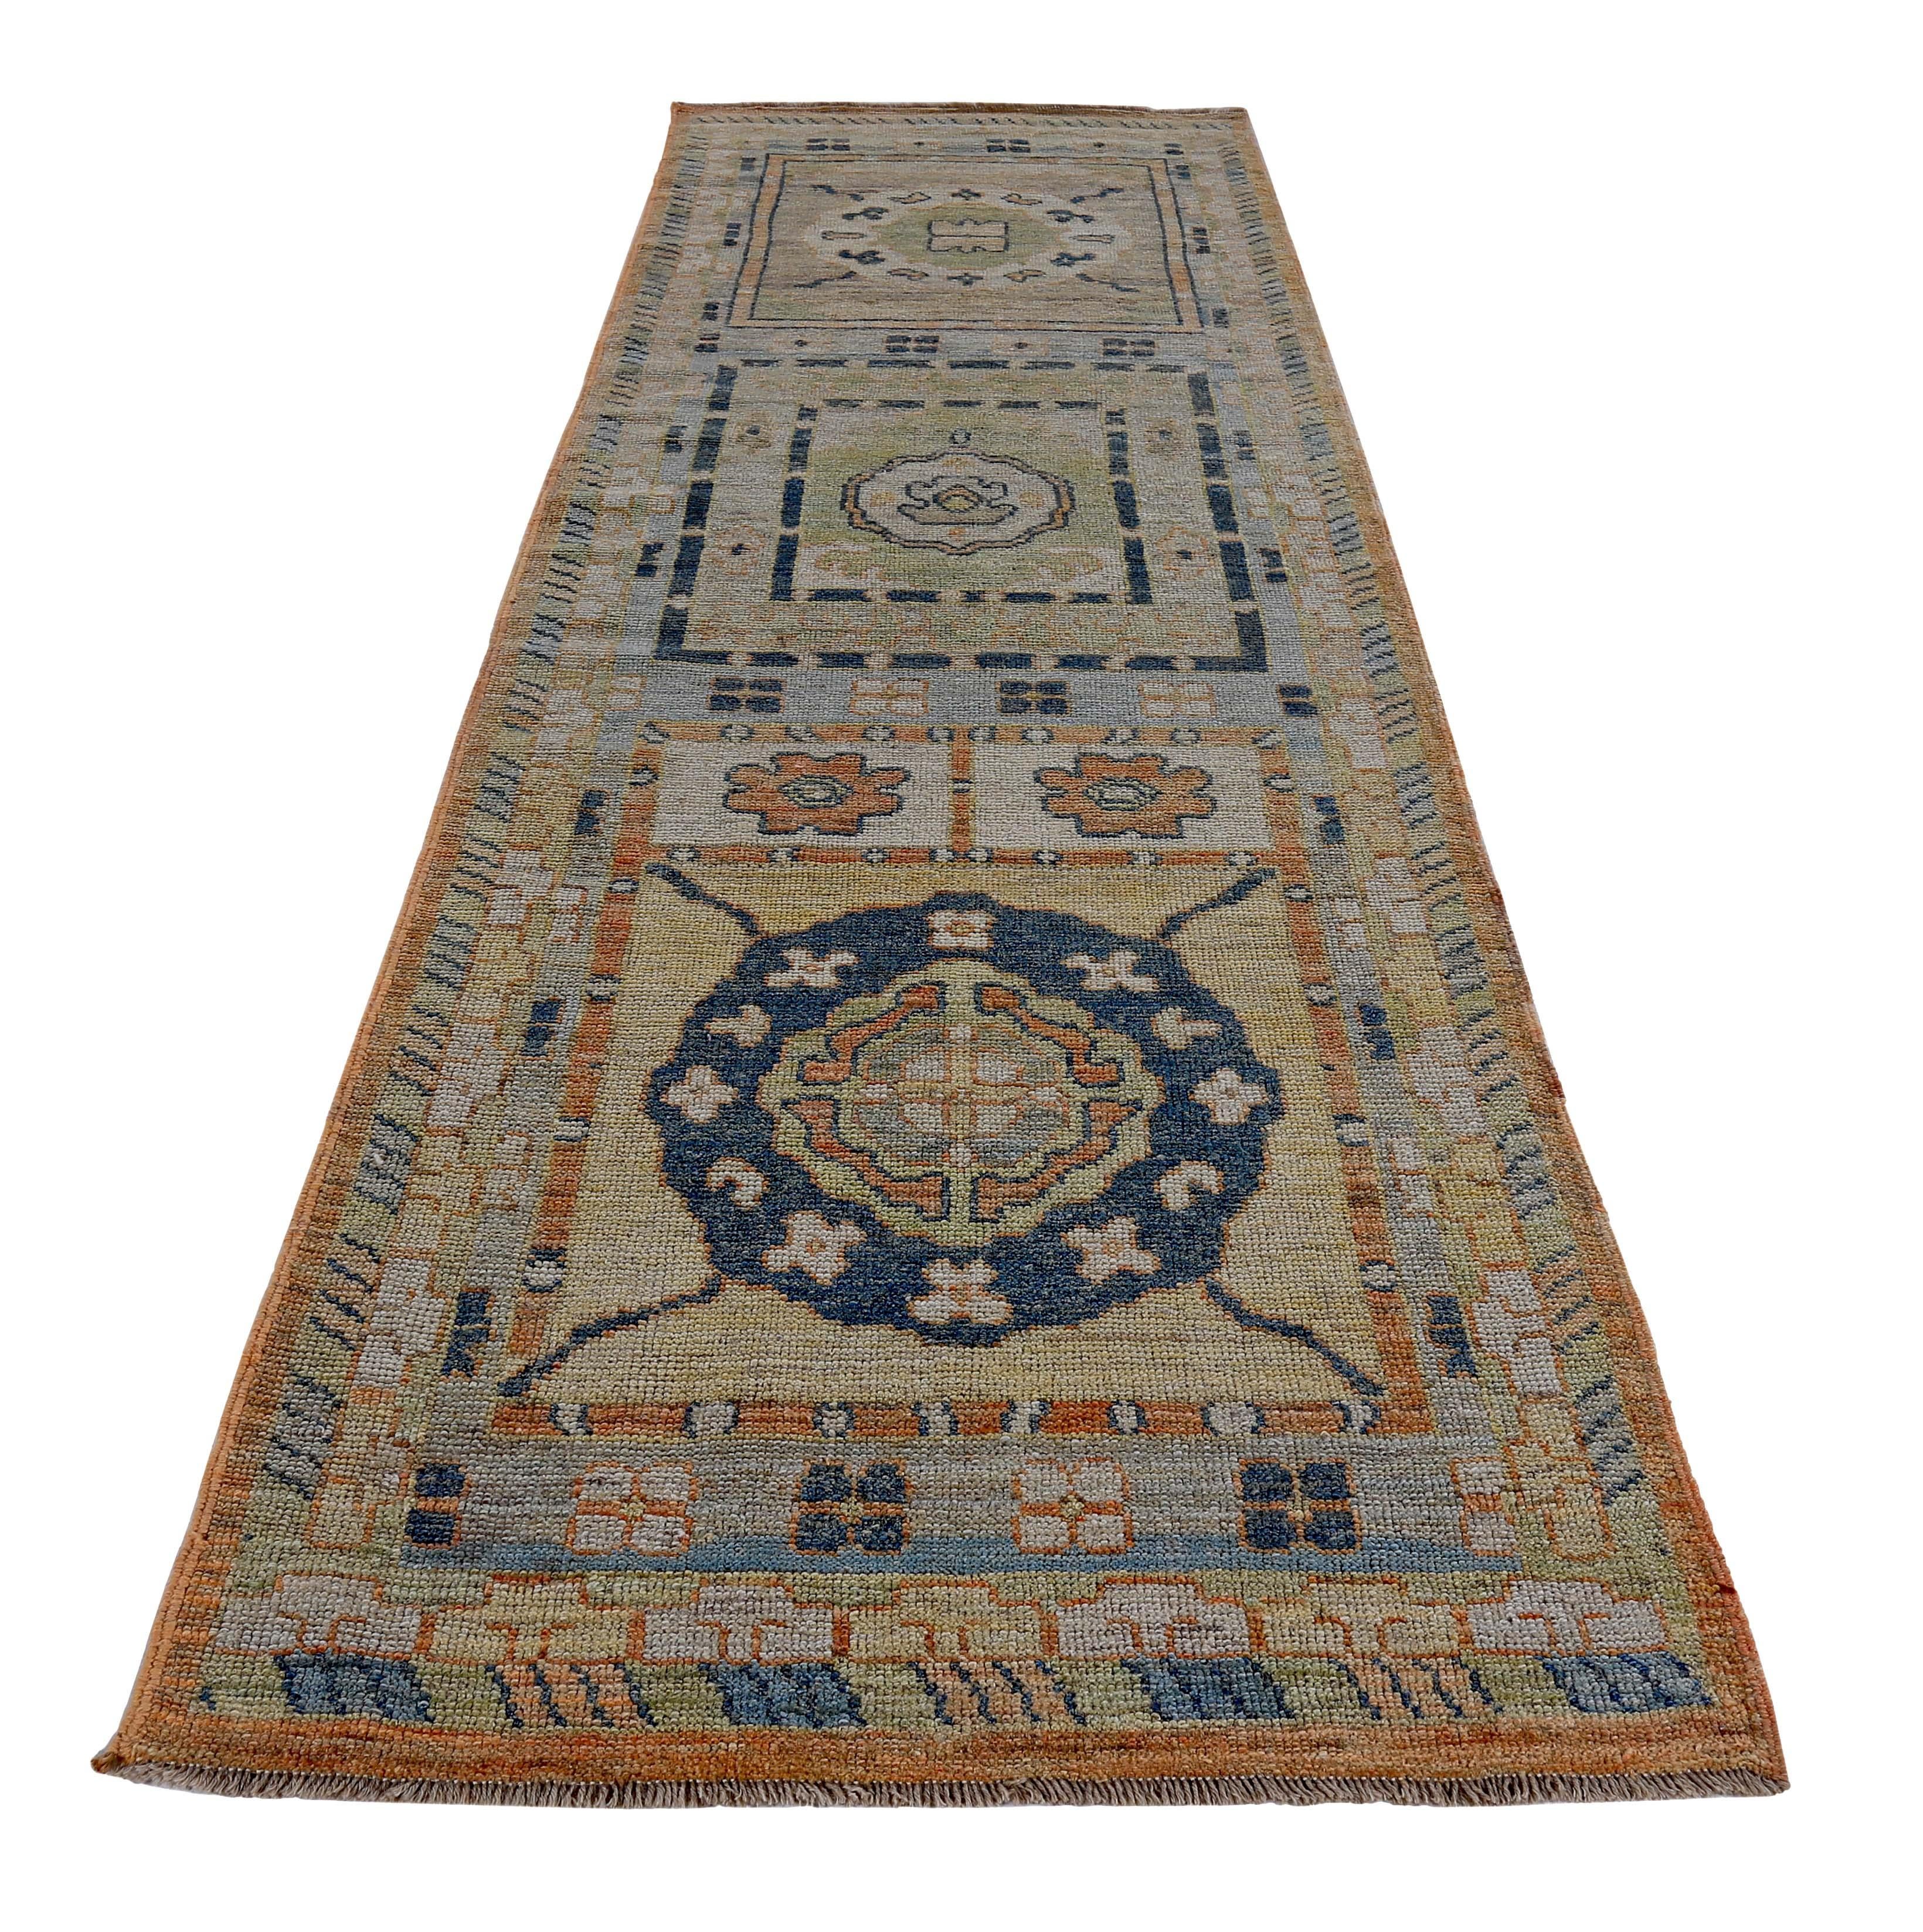 Turkish runner rug made of handwoven sheep’s wool of the finest quality. It’s colored with organic vegetable dyes that are certified safe for humans and pets alike. It features navy and green floral patterns on a beautiful blue and orange field.